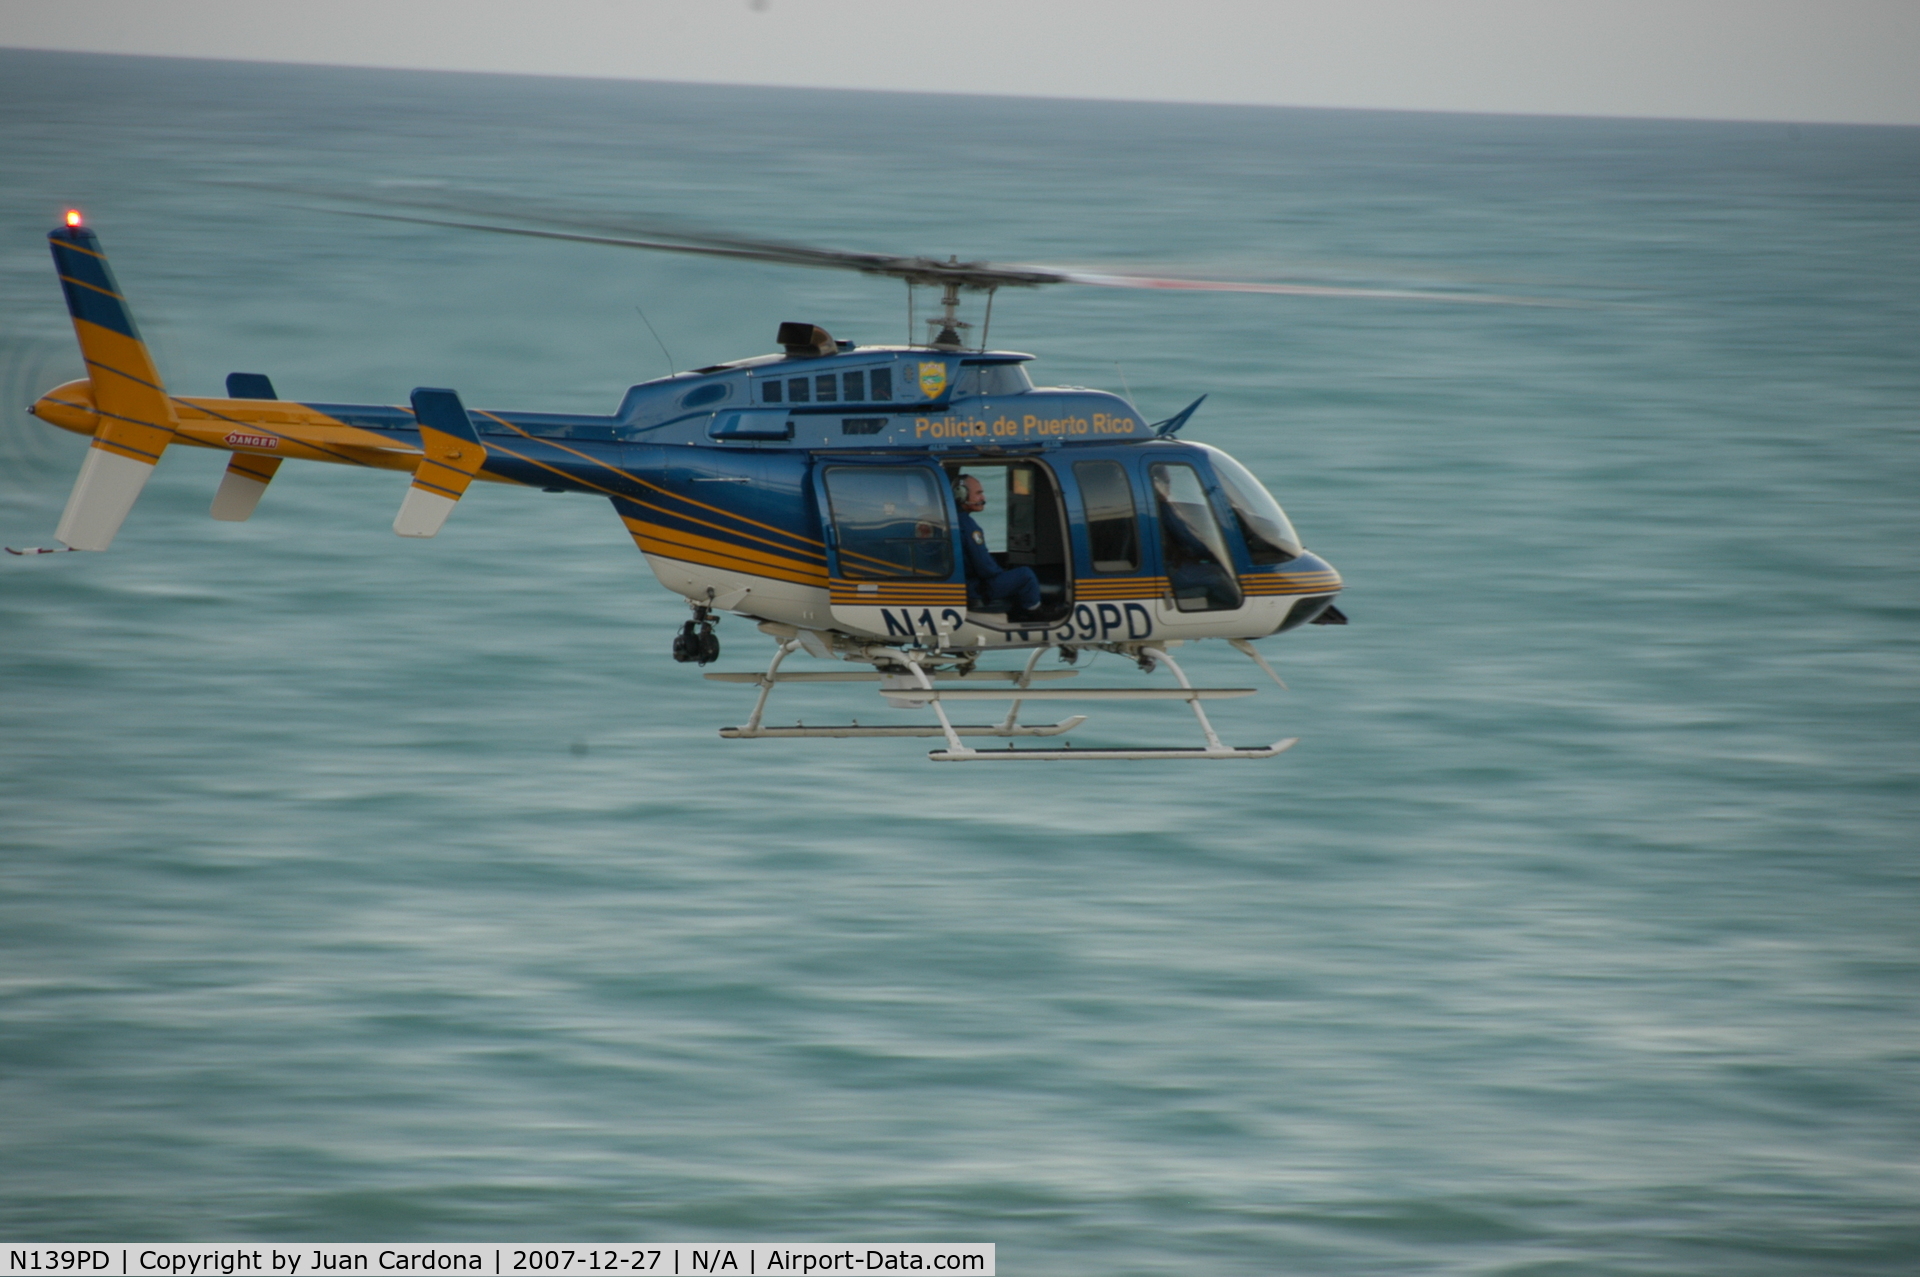 N139PD, 2004 Bell 407 C/N 53631, Puerto Rico Police Dept. Helicopter